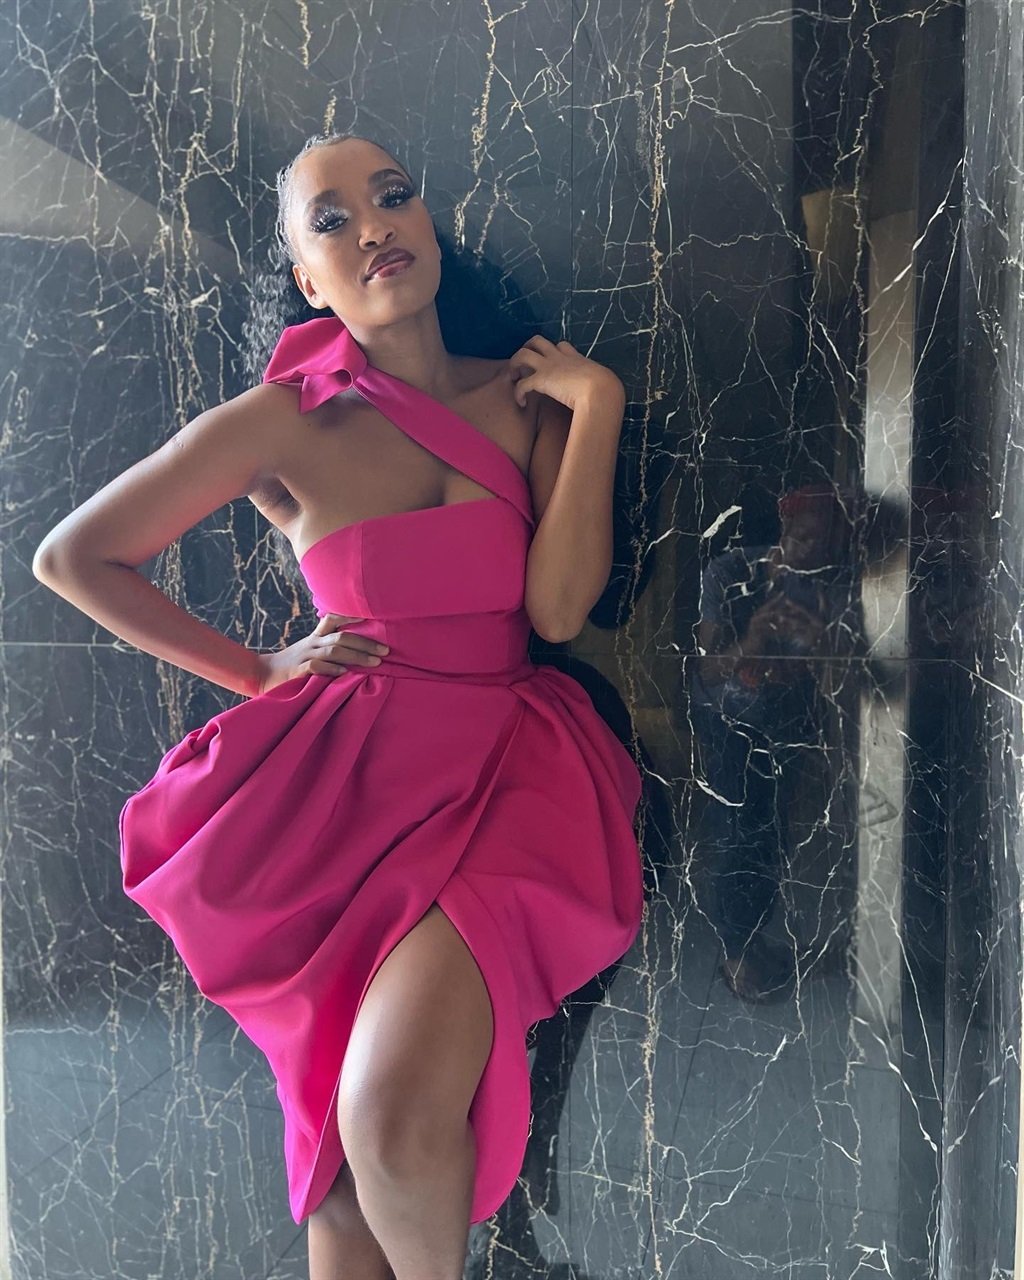 SAMA award-winning singer and songwriter, Gugulethu Khumalo, popularly known as Berita, left her fans shocked when she revealed early this morning on Twitter that she is no longer married to Nhlamulo “Nota” Baloyi.